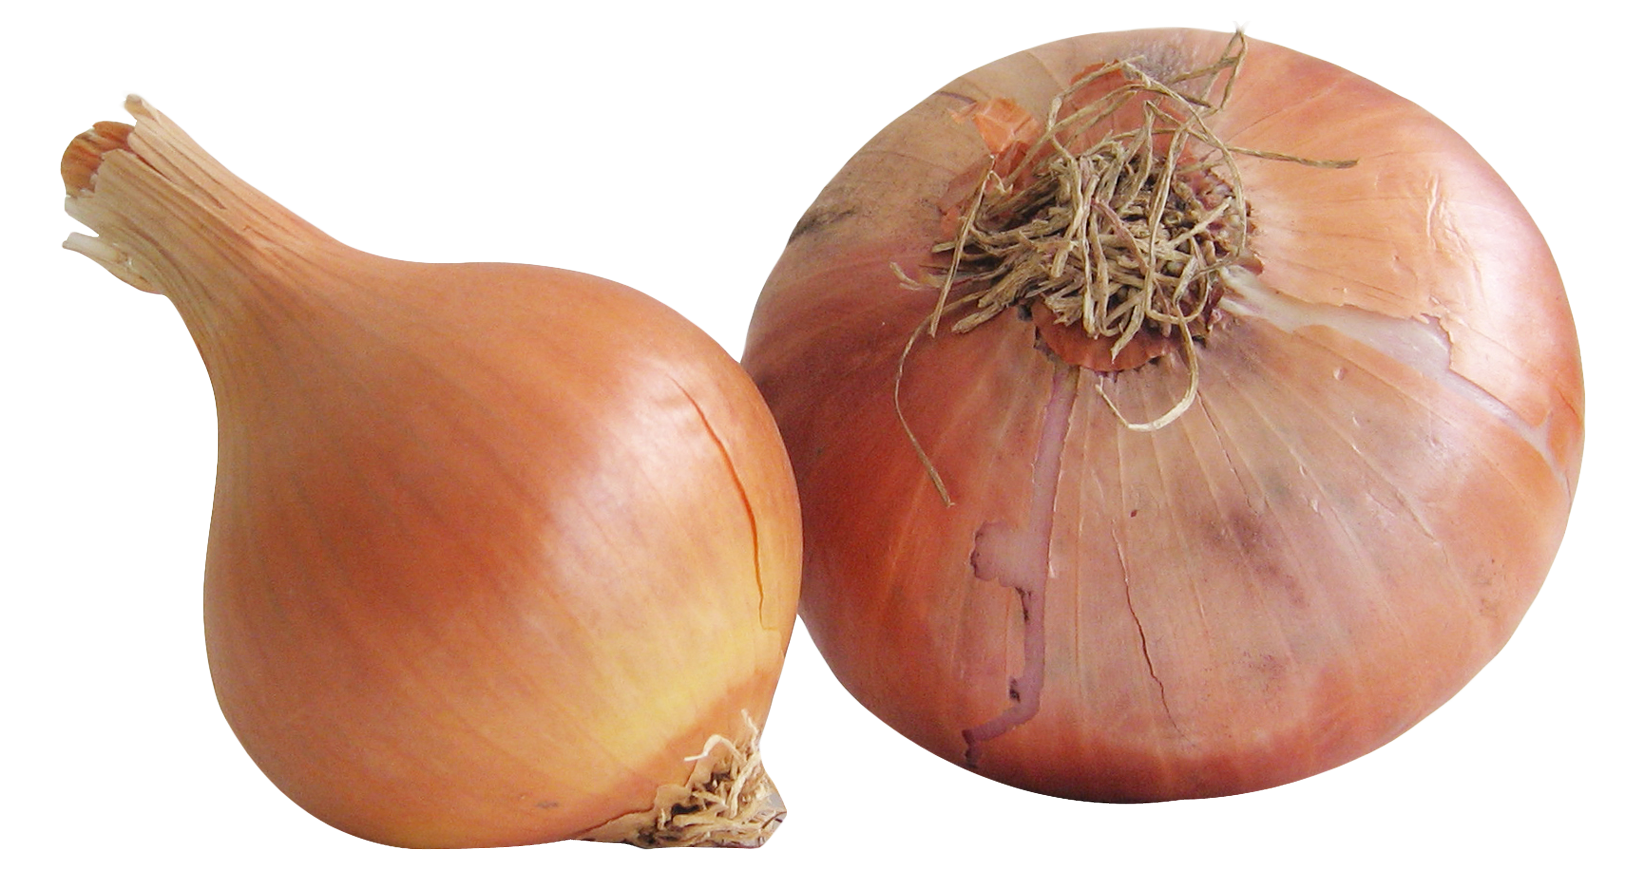 A Close Up Of Onions